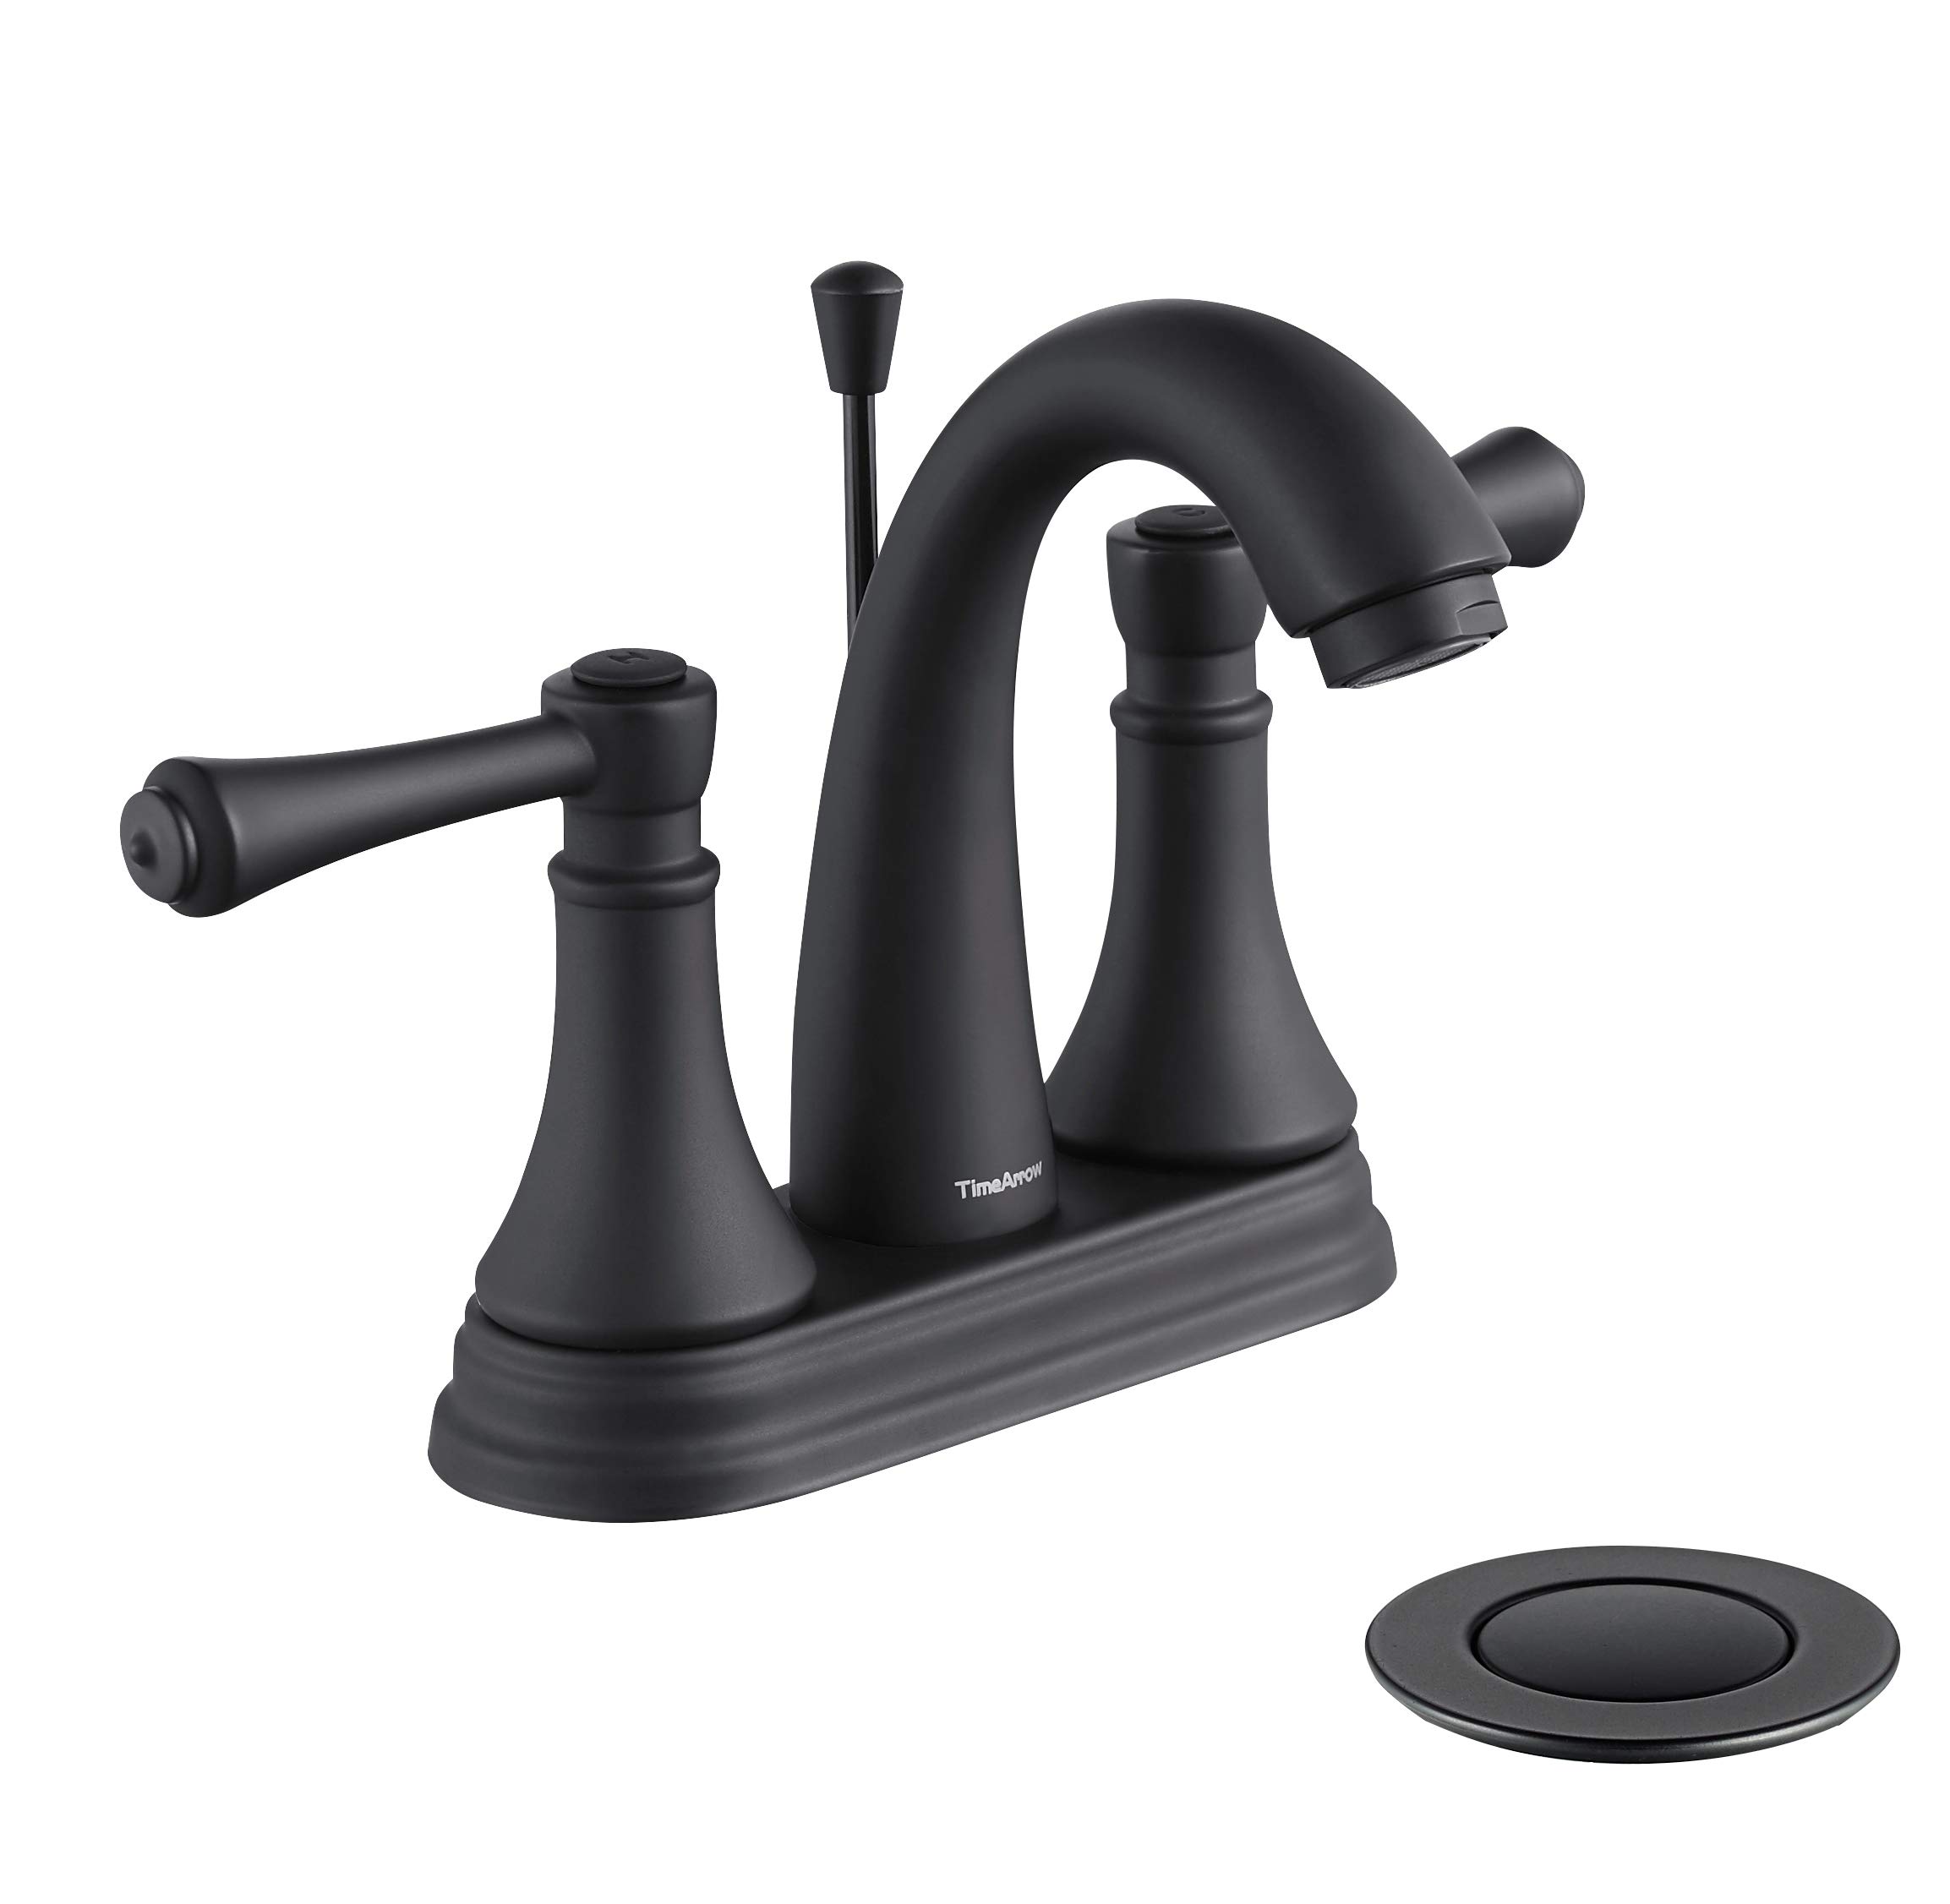 Matte Black 4 Inch Bathroom Sink Faucet 3 Hole, 2 Handle Centerset Bathroom Faucet with Metal Casting Spout, Modern RV Farmhouse Vanity Faucet, Include Drain with Overflow and Lift Rod, TAF410Y-MB